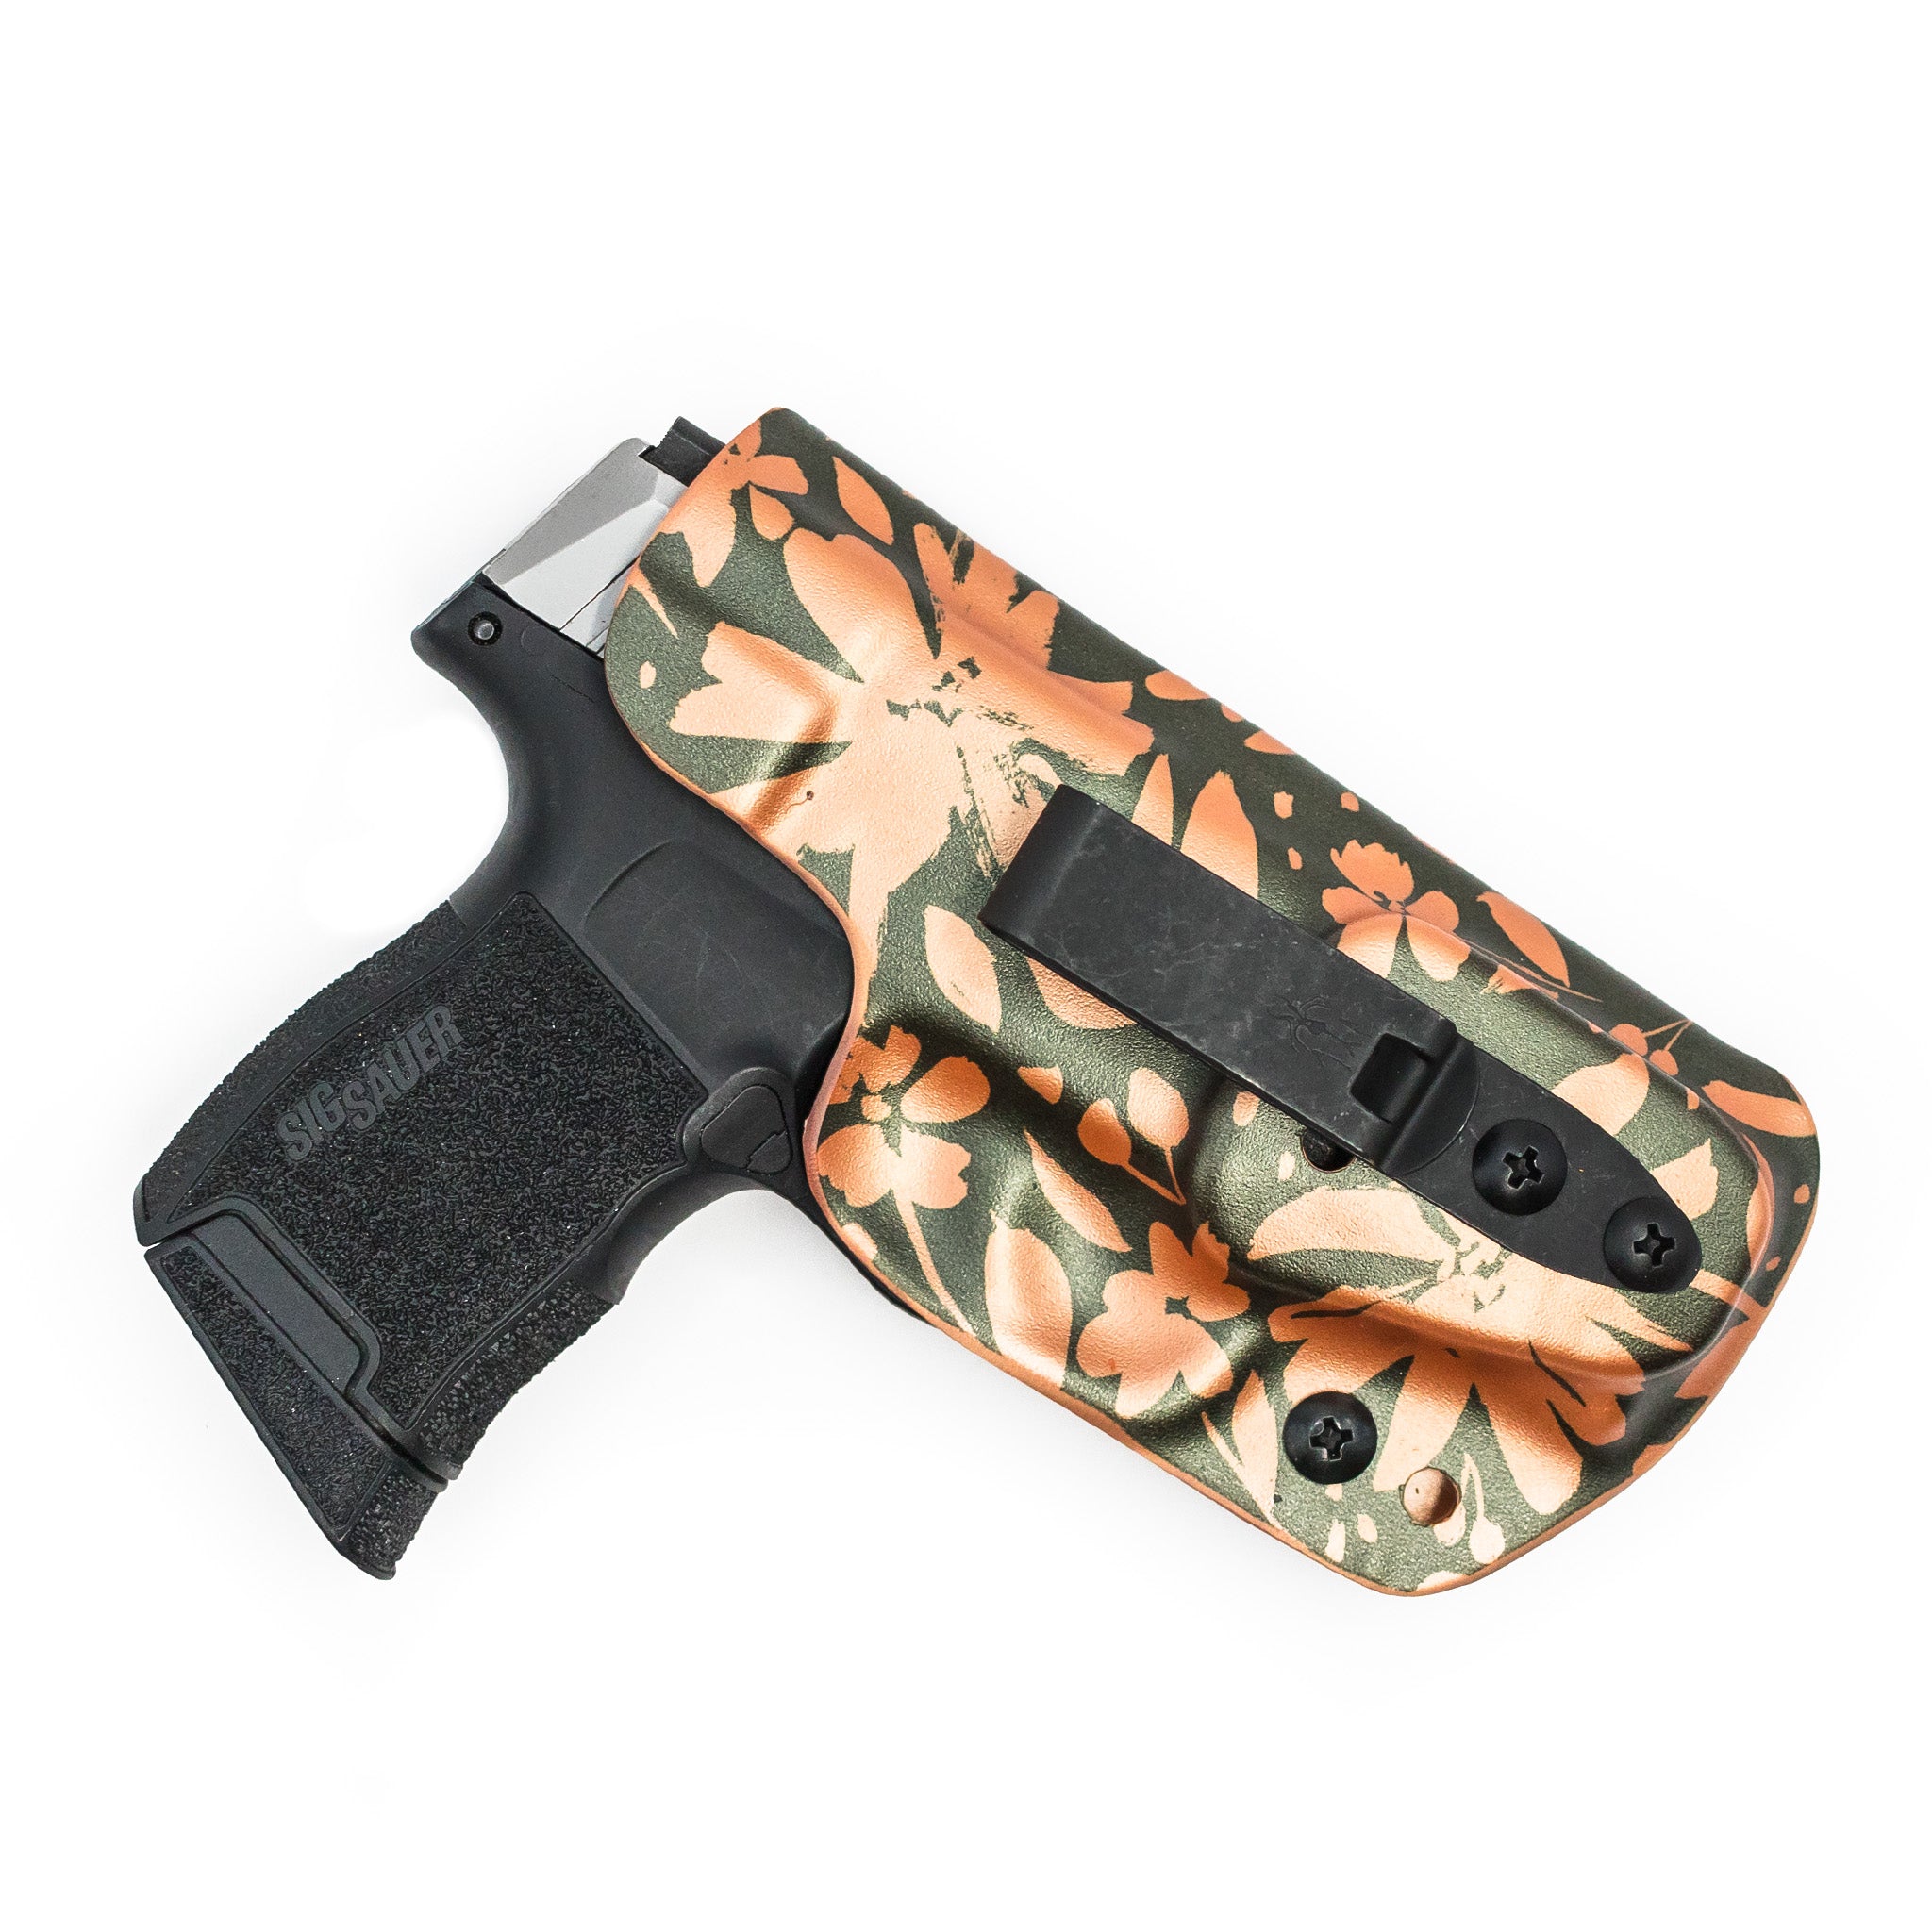 Boutique Print Betty 2.0 inside for holsters Holsters waistband Flashbang the women 